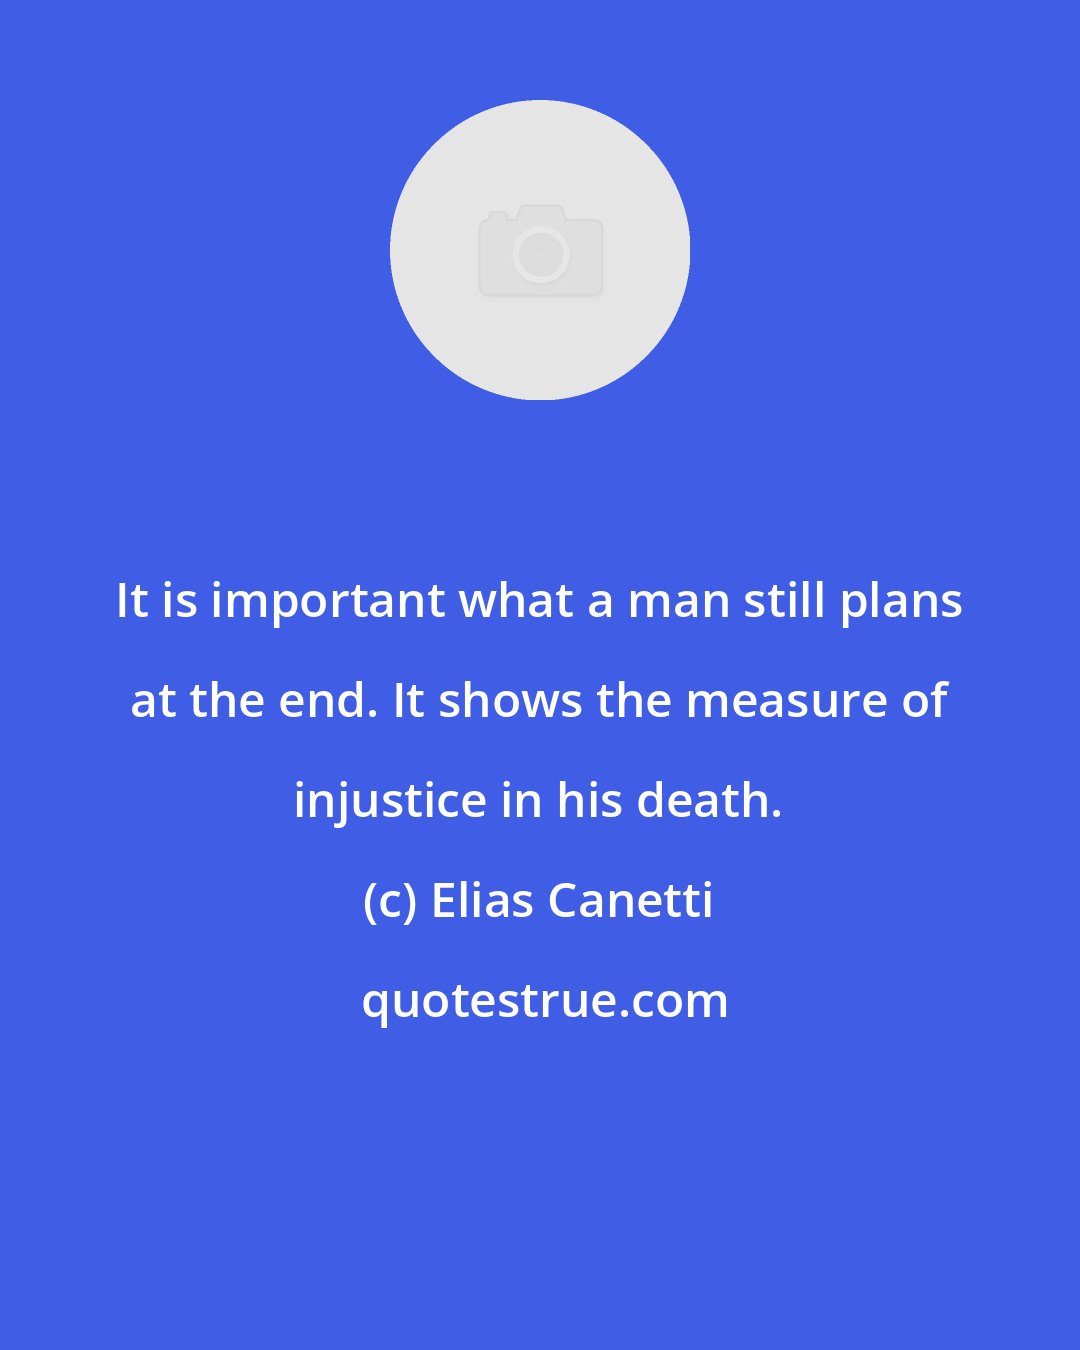 Elias Canetti: It is important what a man still plans at the end. It shows the measure of injustice in his death.